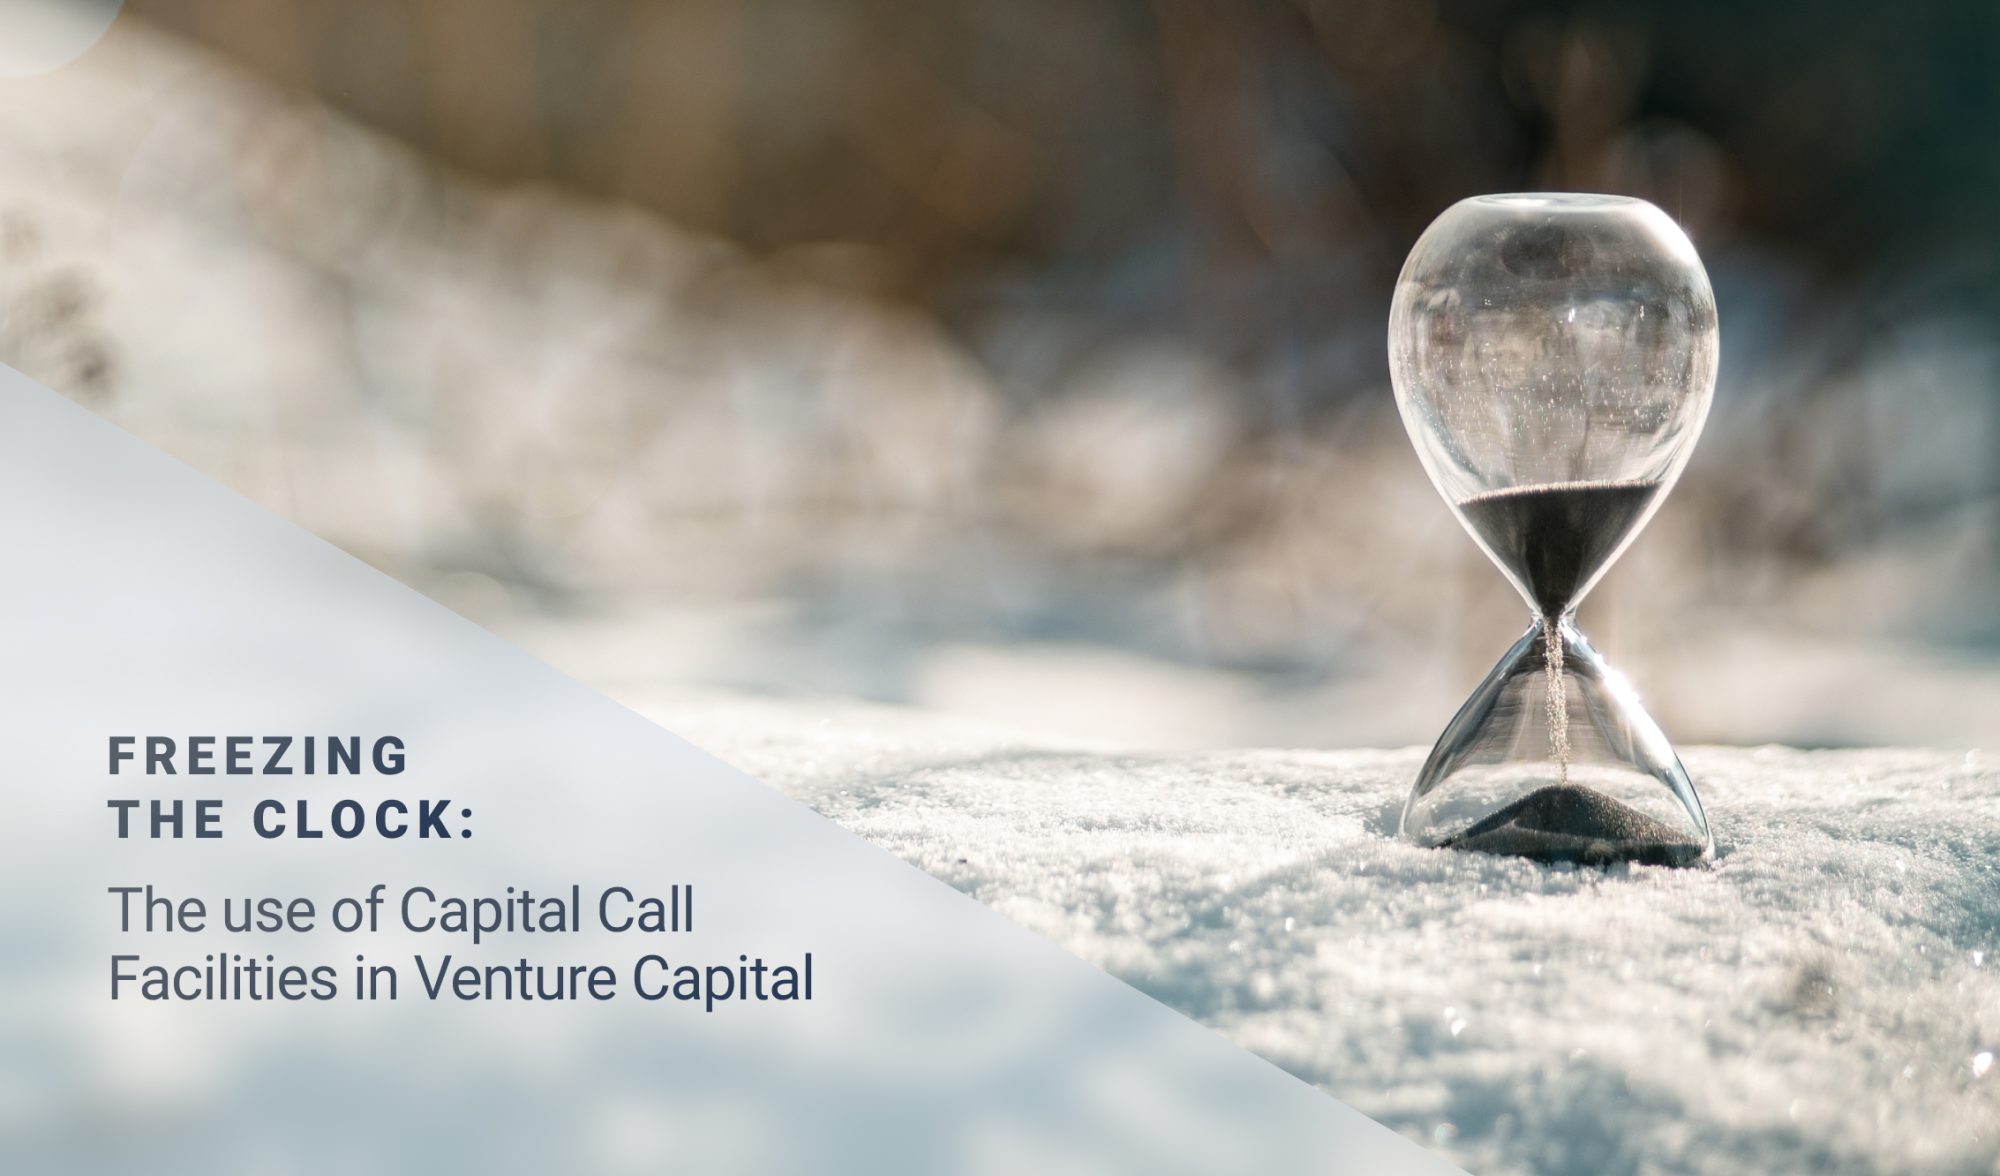 Freezing the Clock: The Use of Capital Call Facilities in Venture Capital